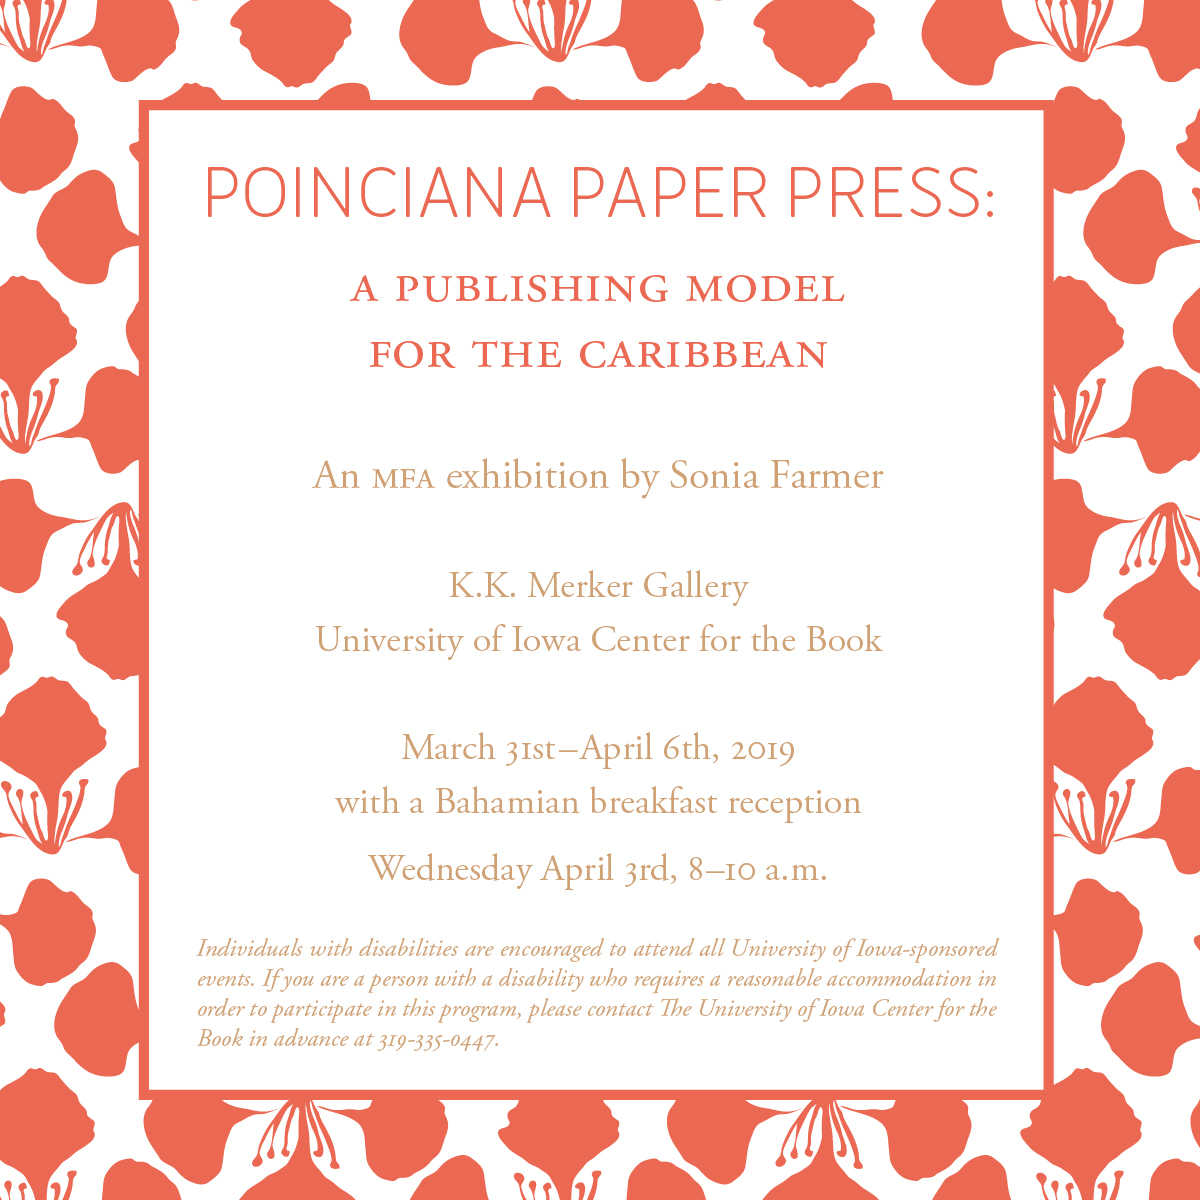 Poinciana Paper Press: A Publishing Model for the Caribbean poster